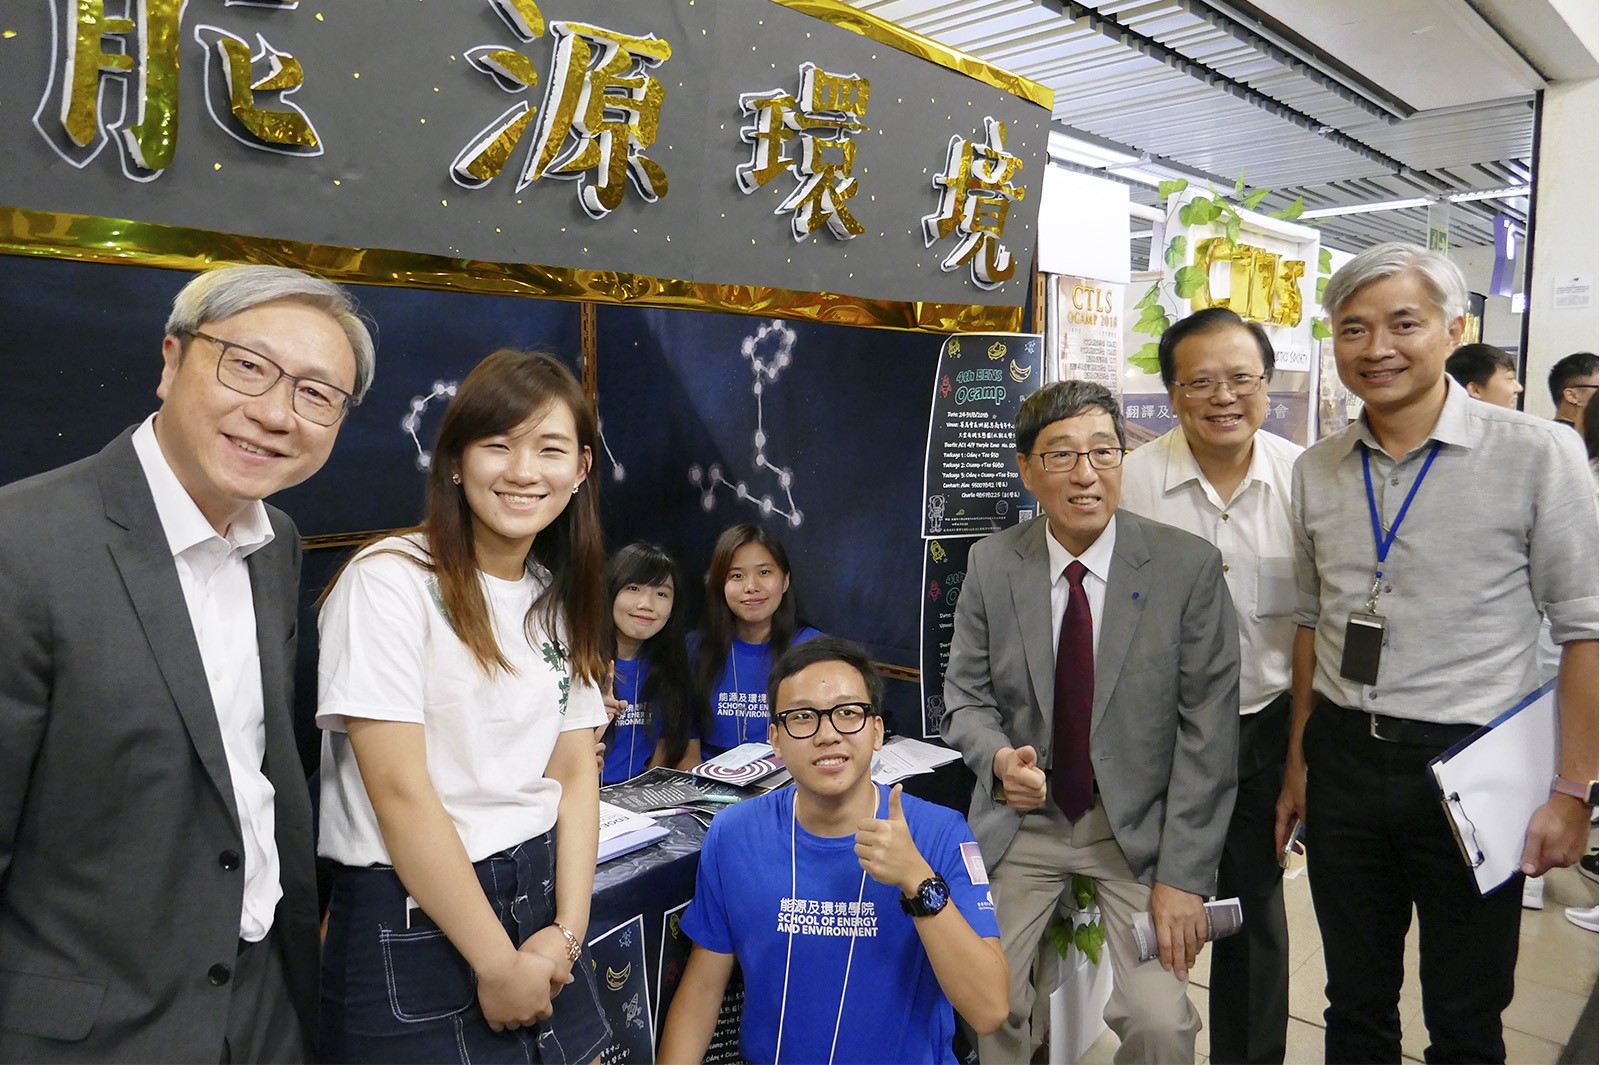 President Kuo (third from right), Professor Ip (far left), Dr Kwok (far right) and Dr Wong (second from right) visit the stalls of the SU clubs and societies.